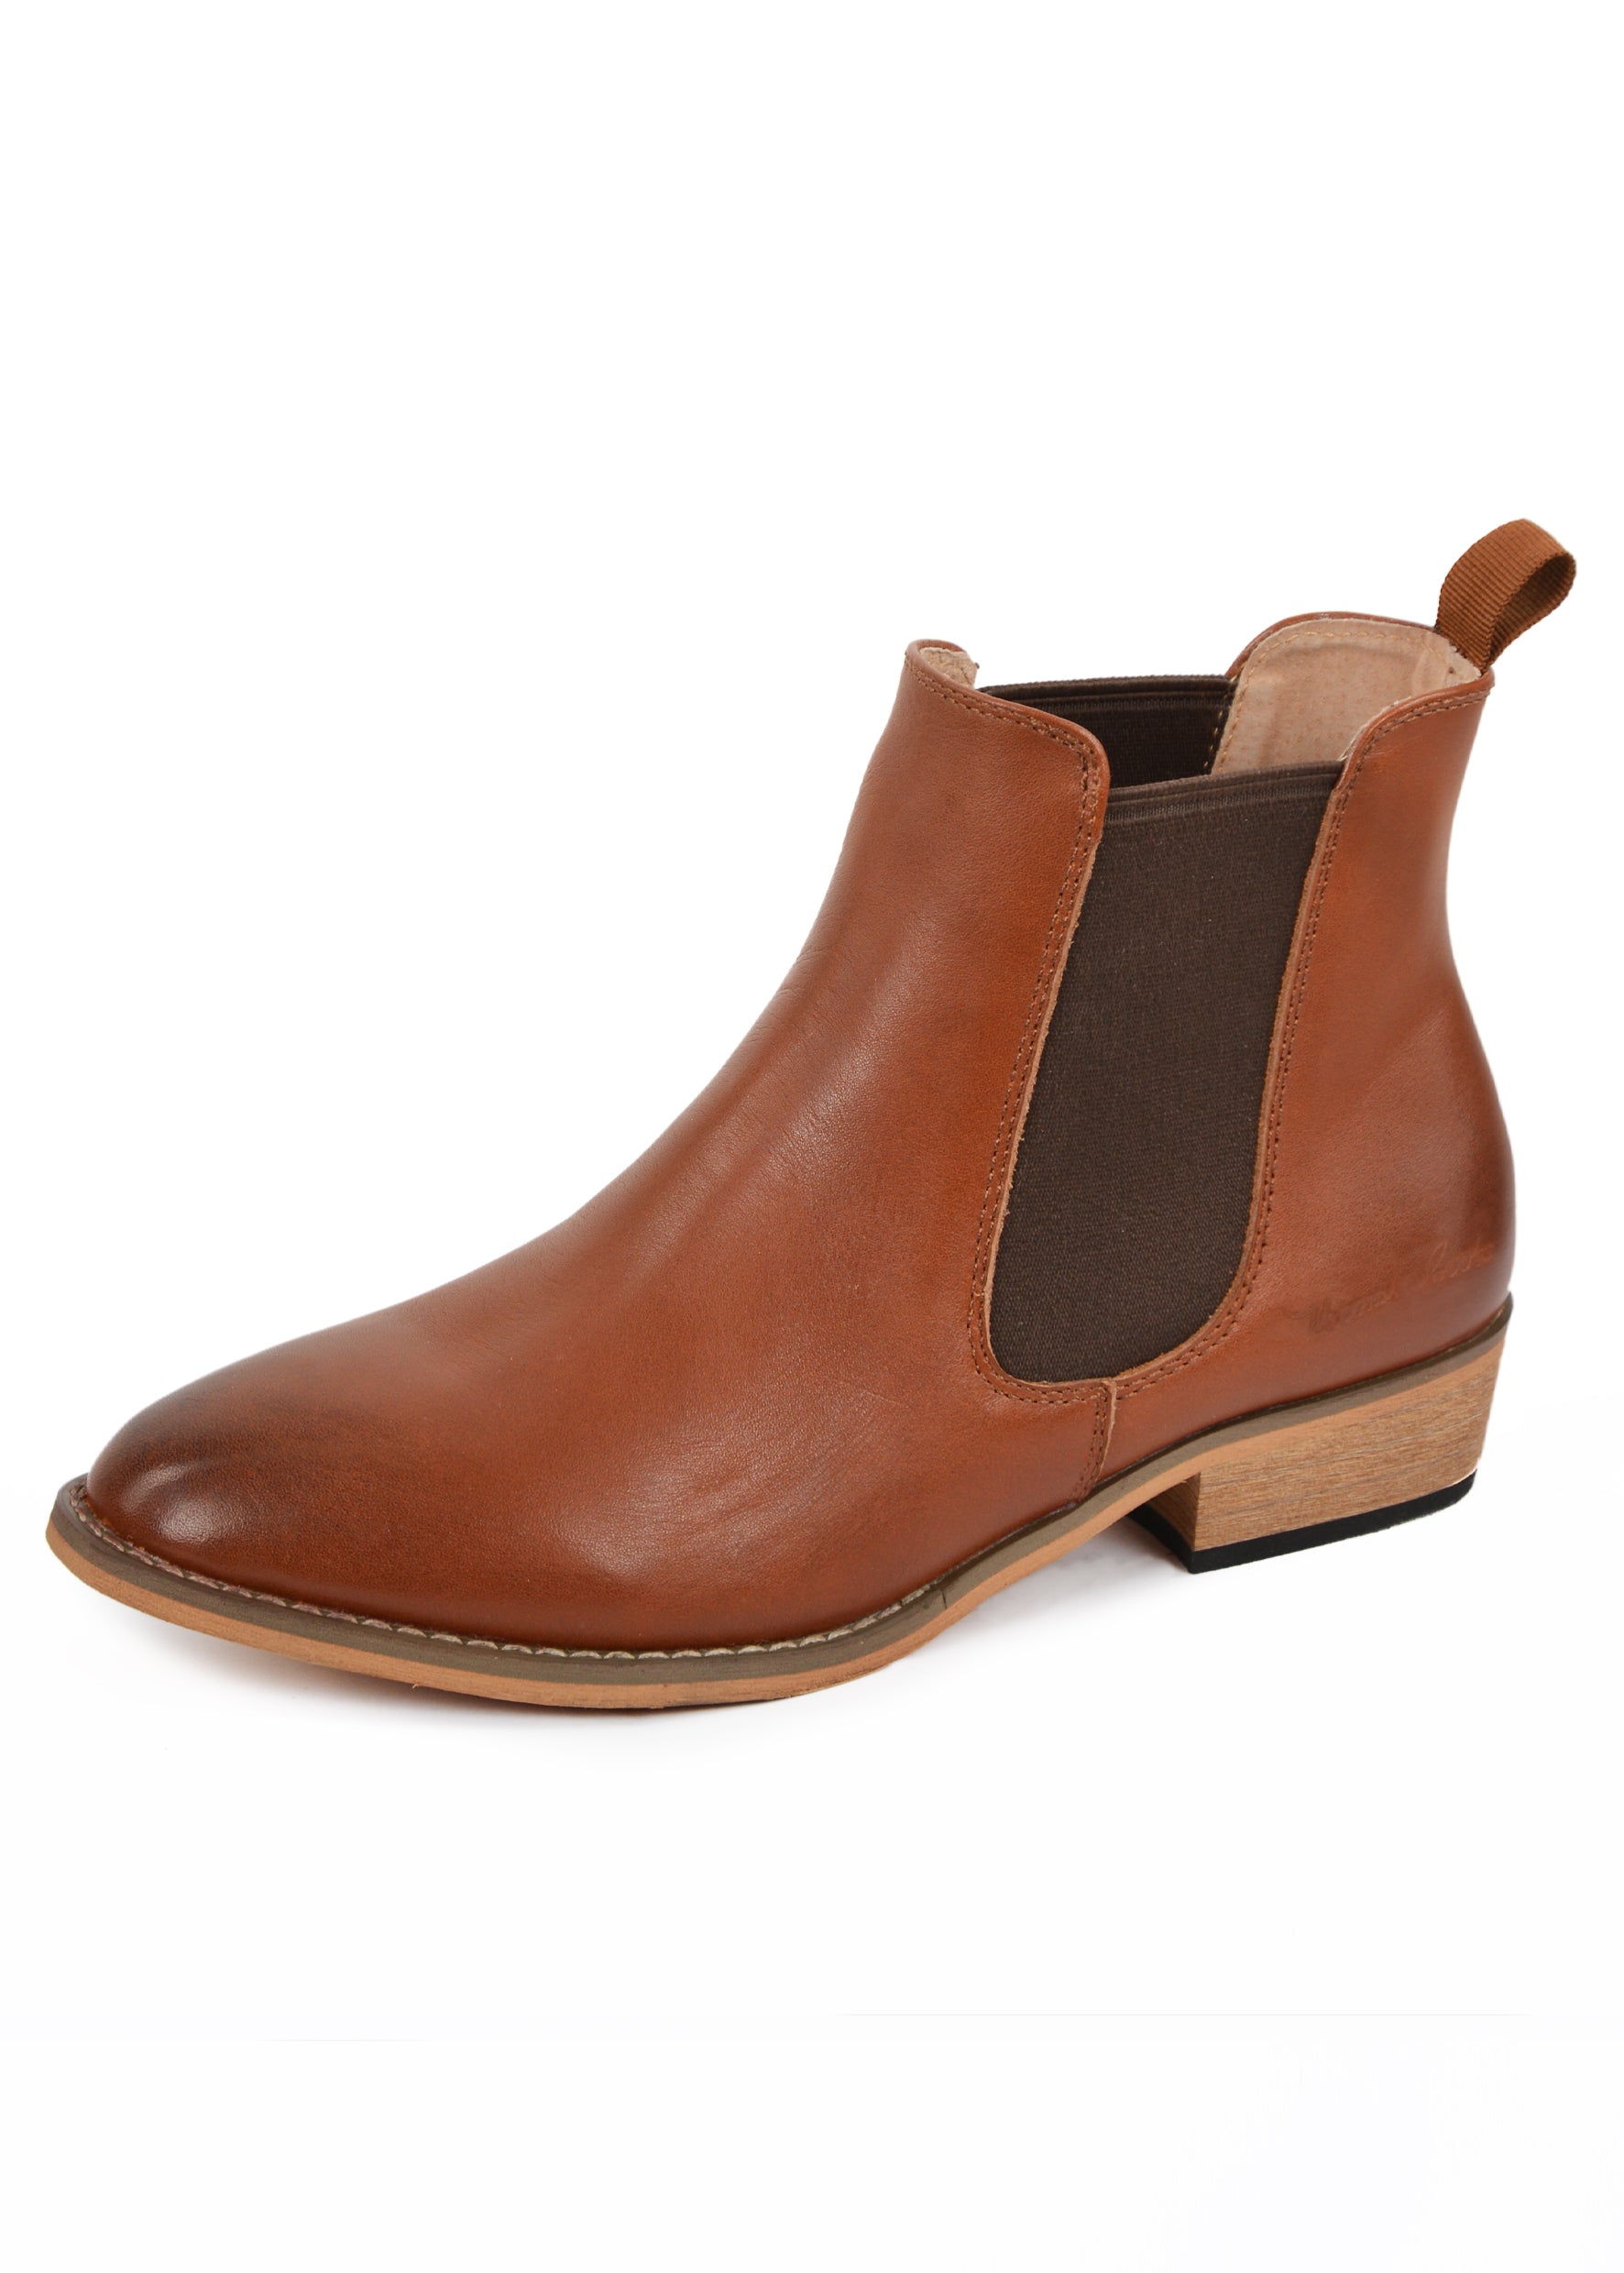 Thomas Cook Wmns Chelsea Boot